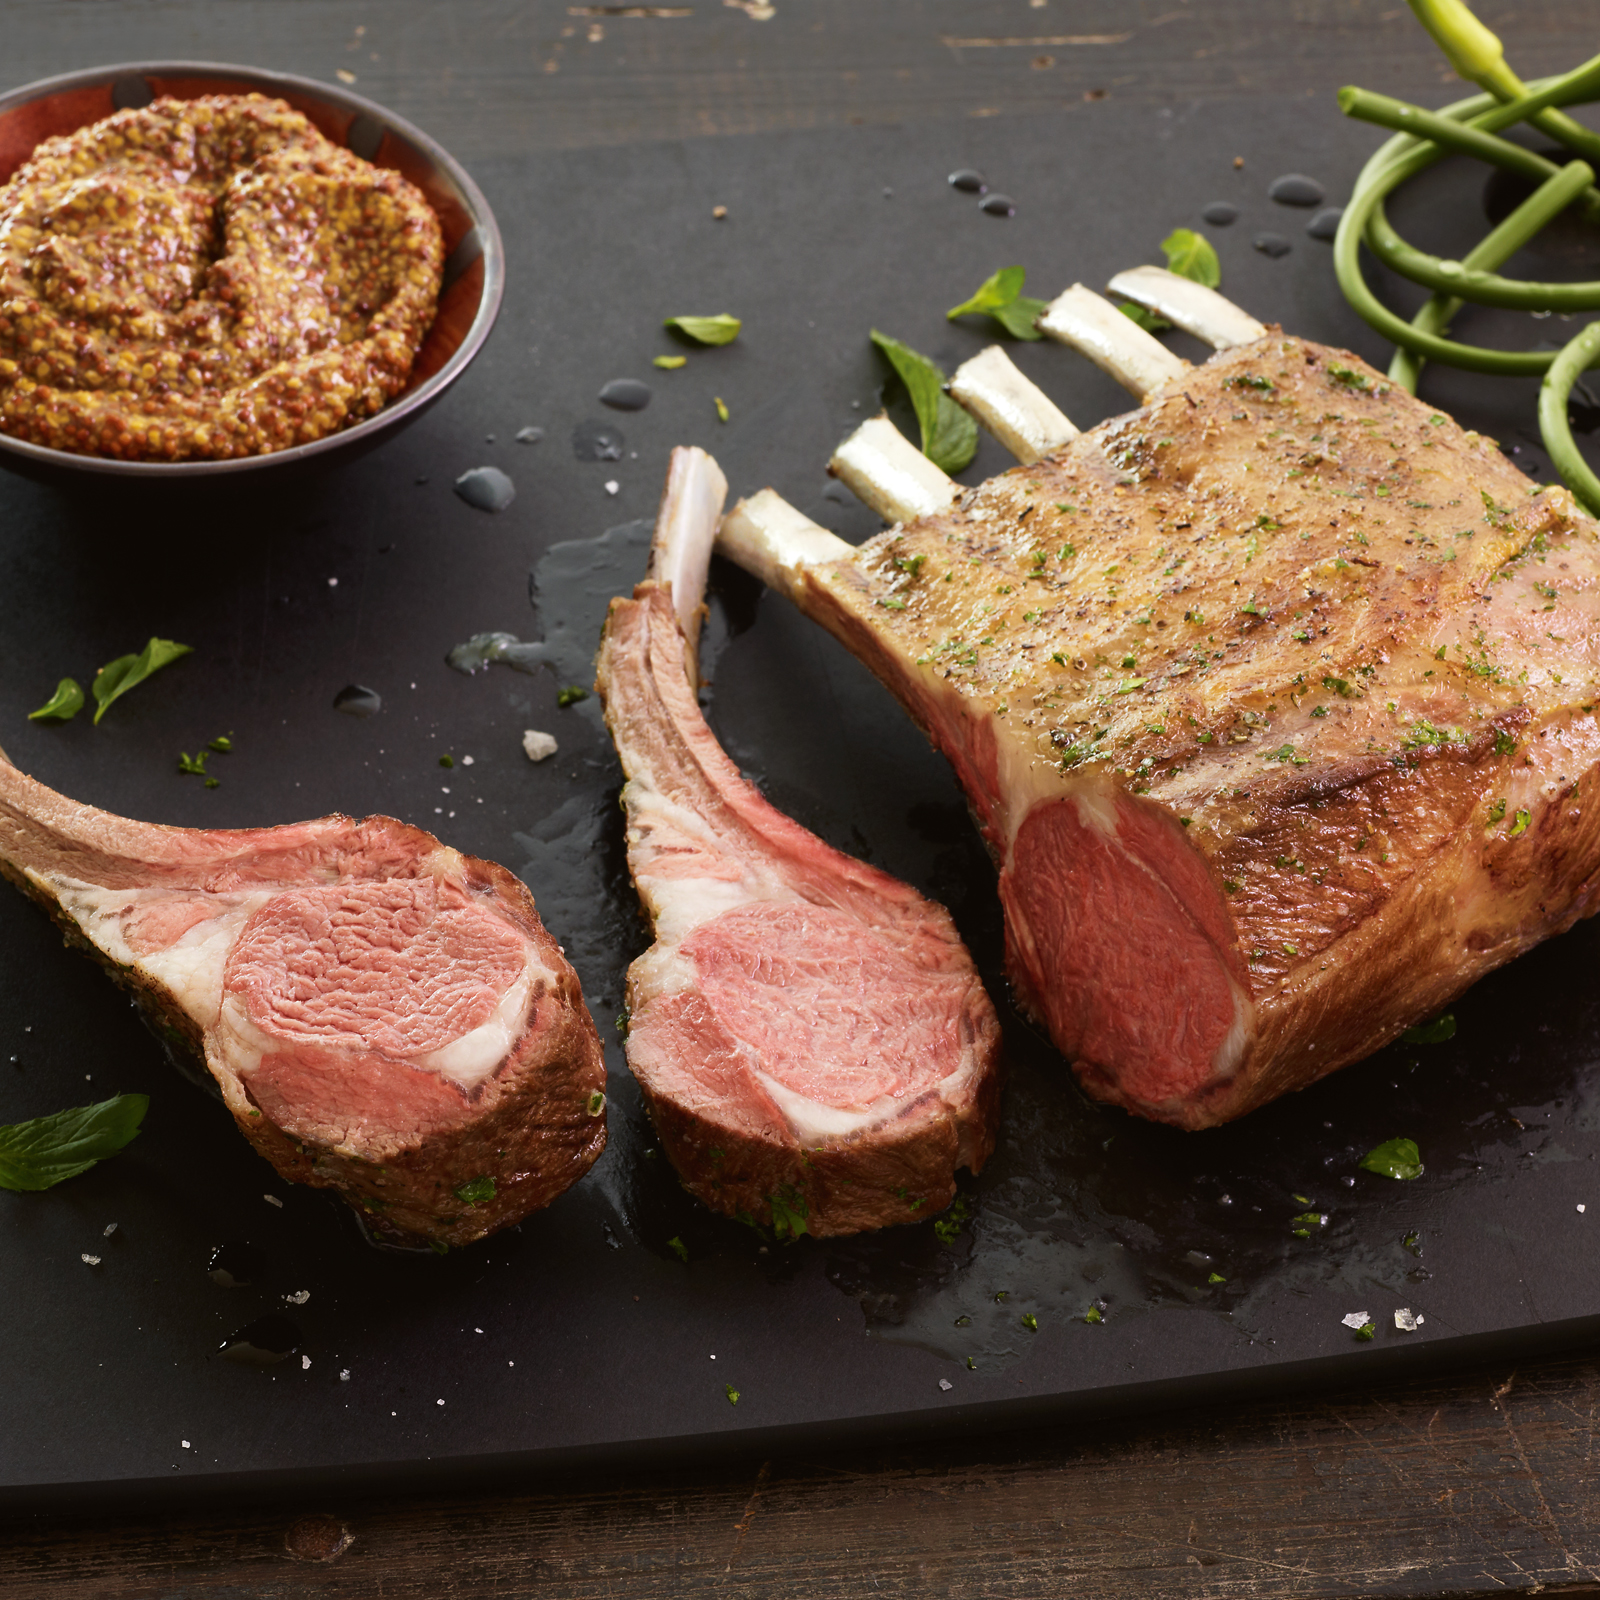 Feature Product of the Month – Lamb